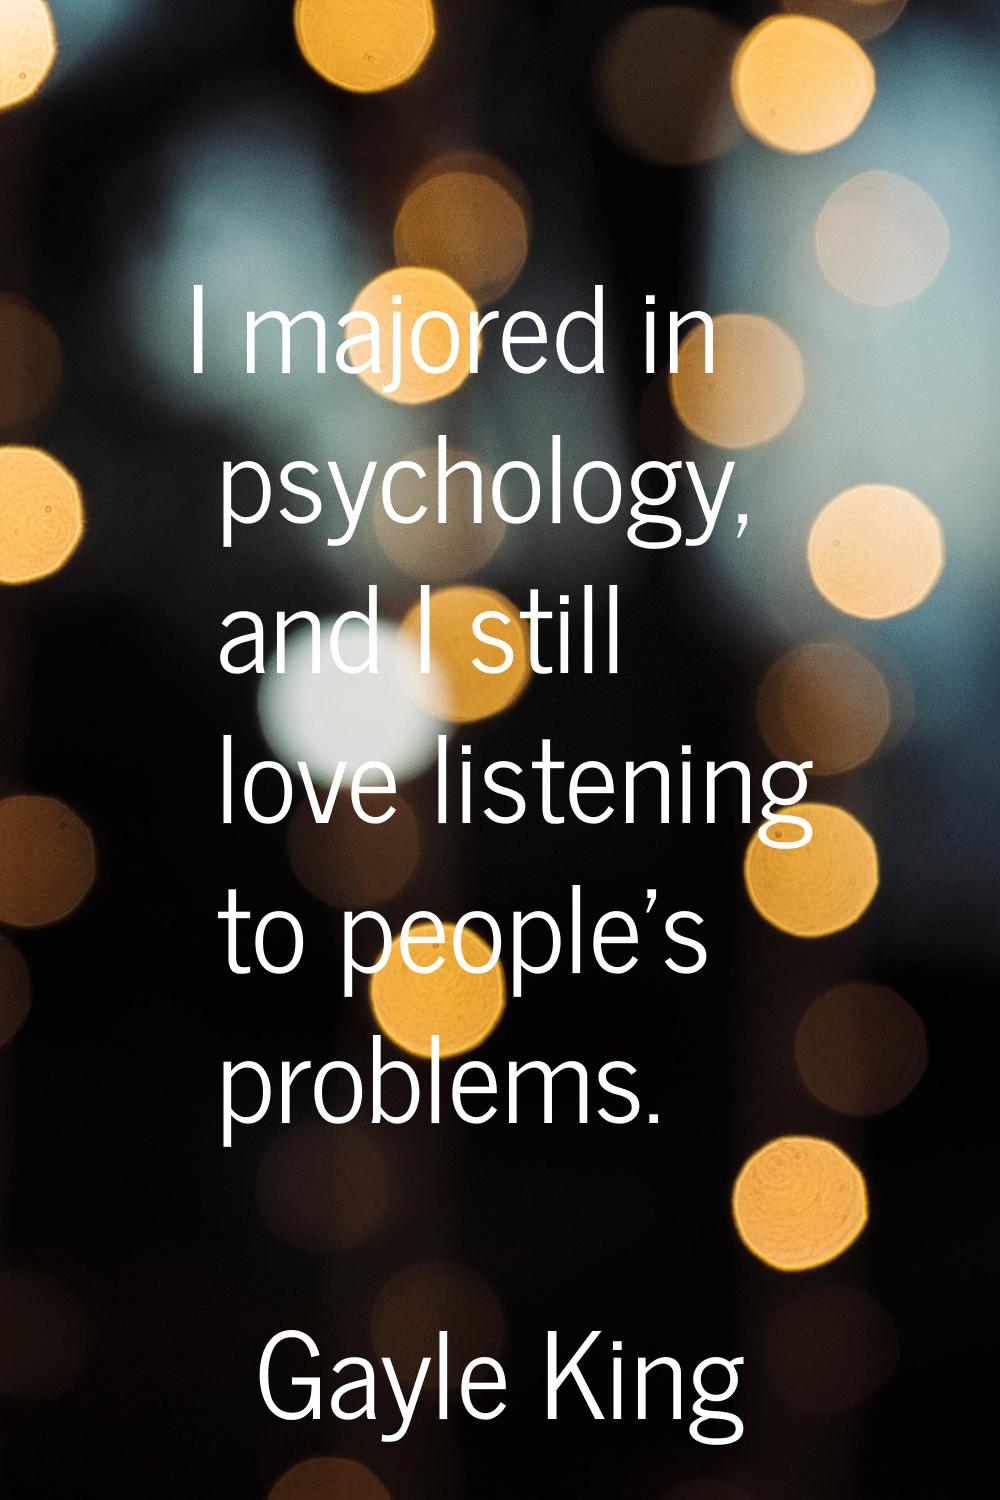 I majored in psychology, and I still love listening to people's problems.